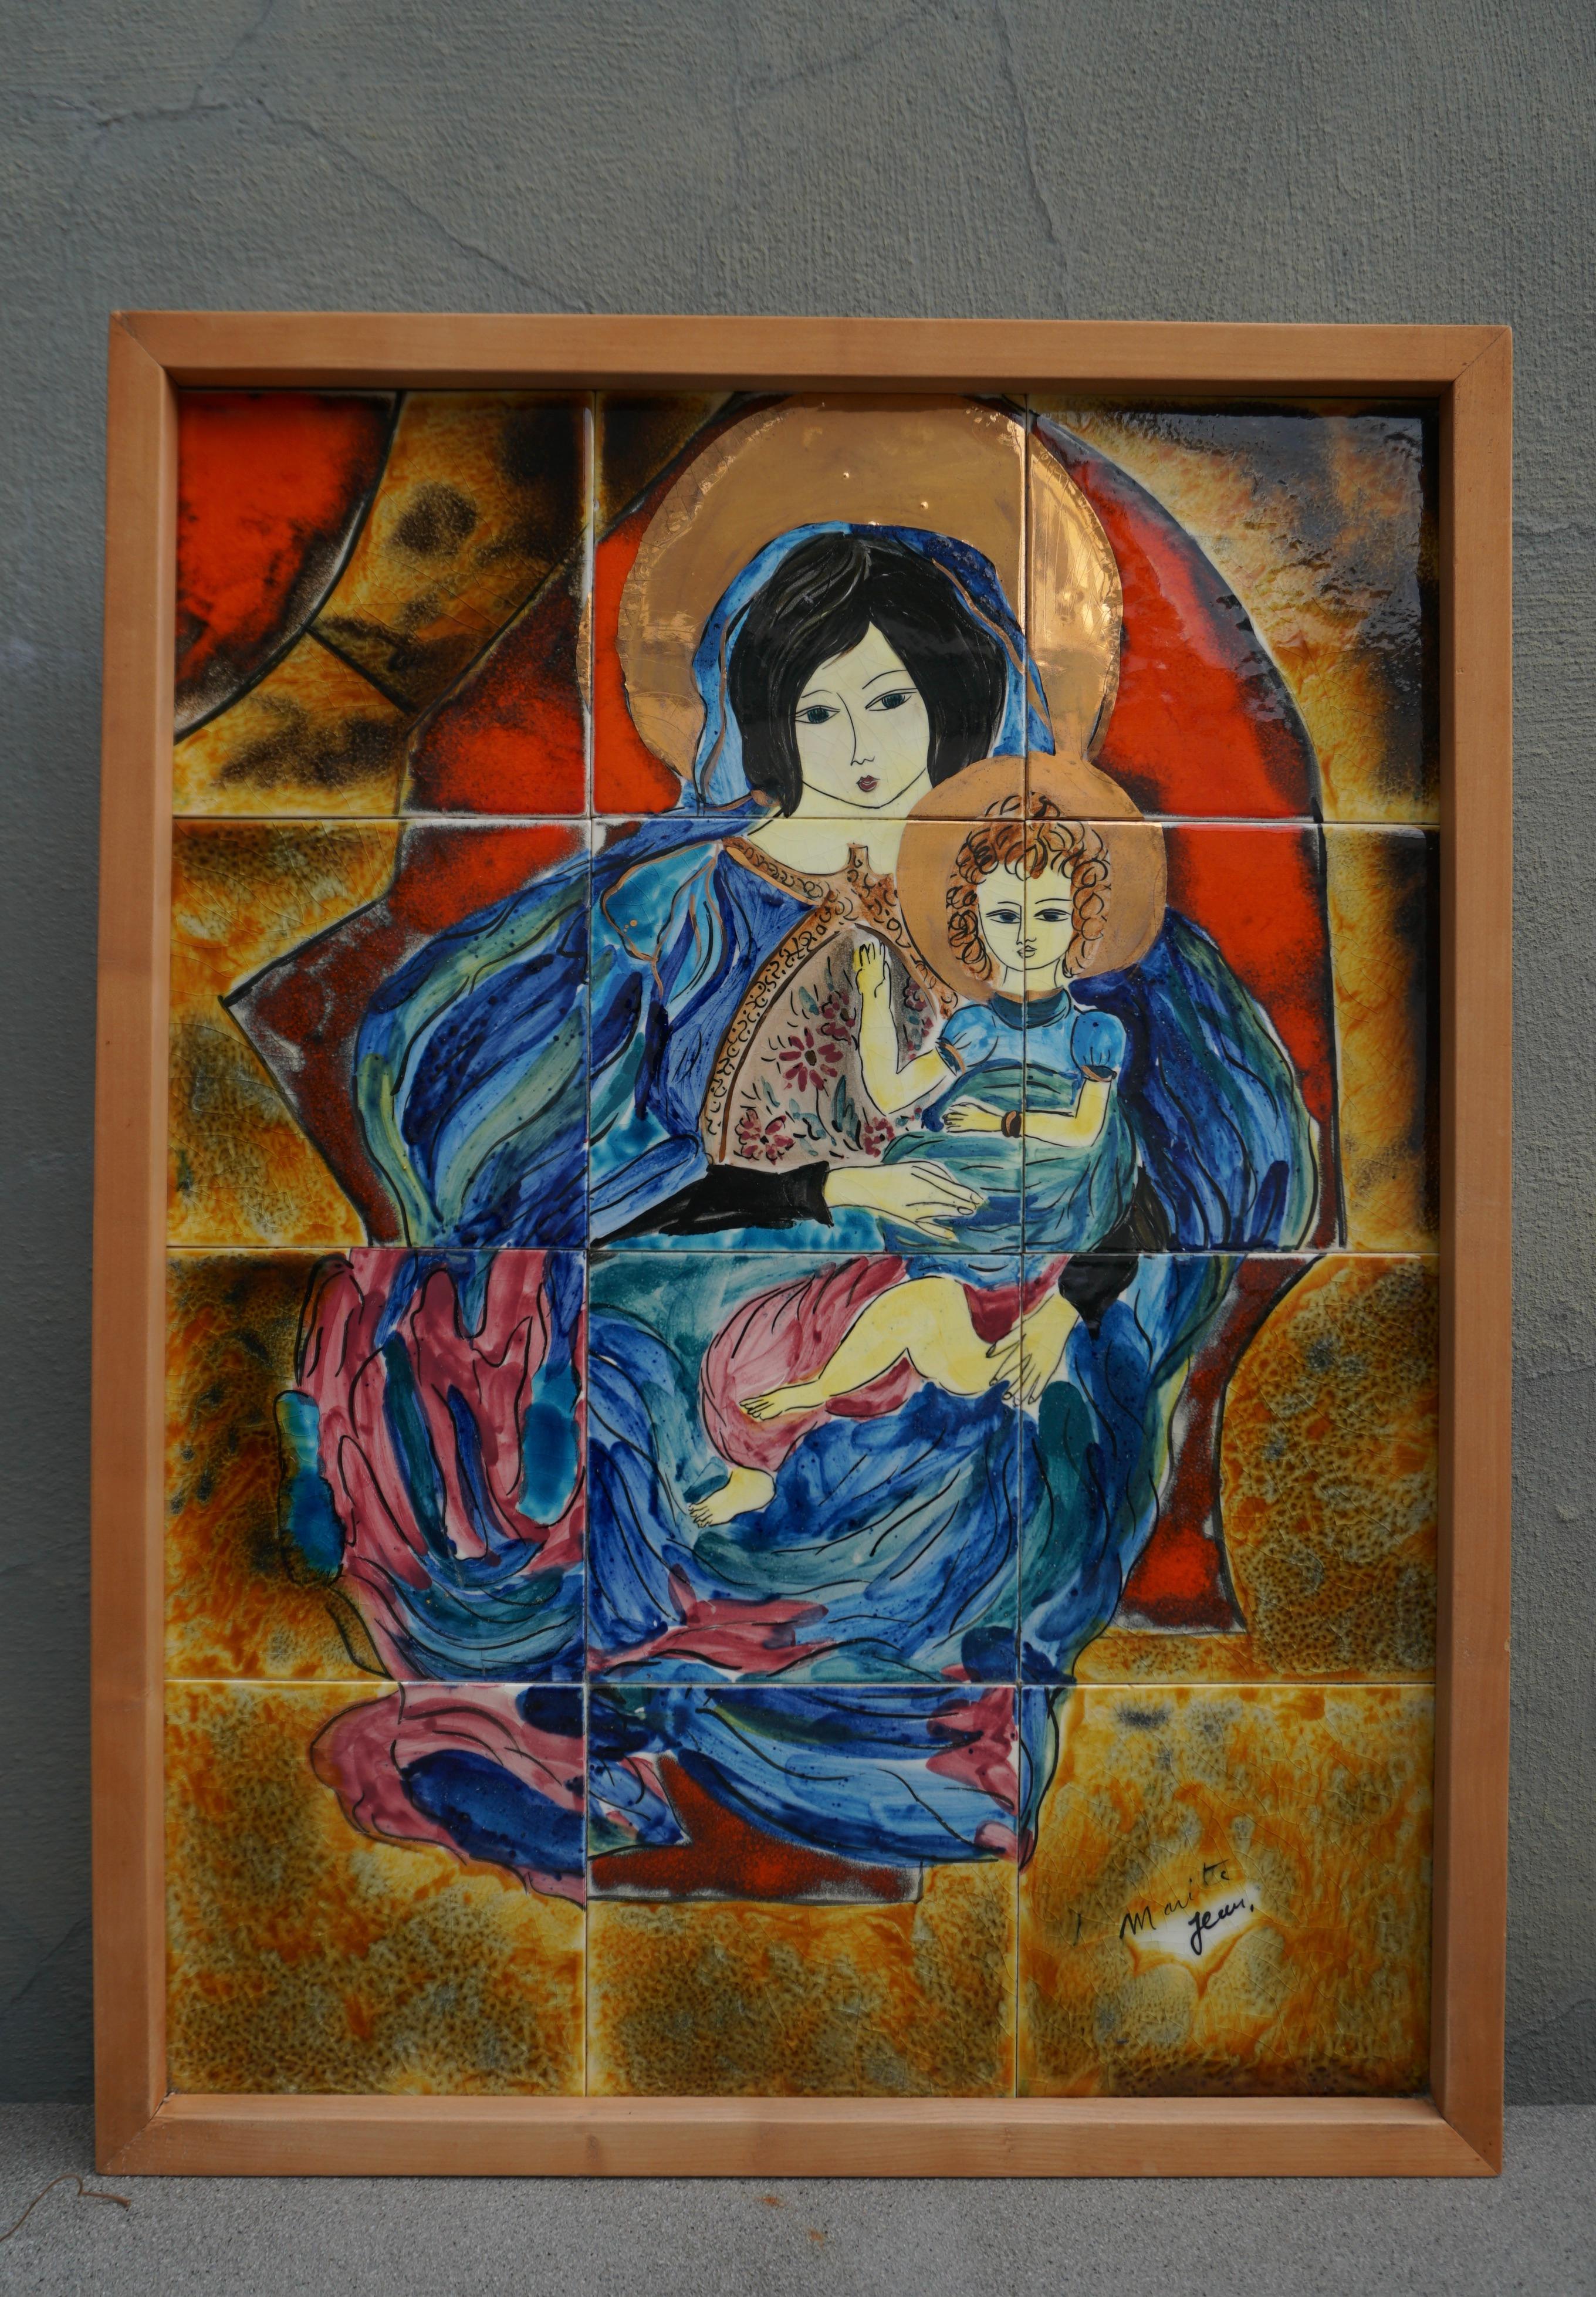 Beautiful colorful and tender rendering of the Madonna and child in ceramic.
Signature illegible.

Width 19.2